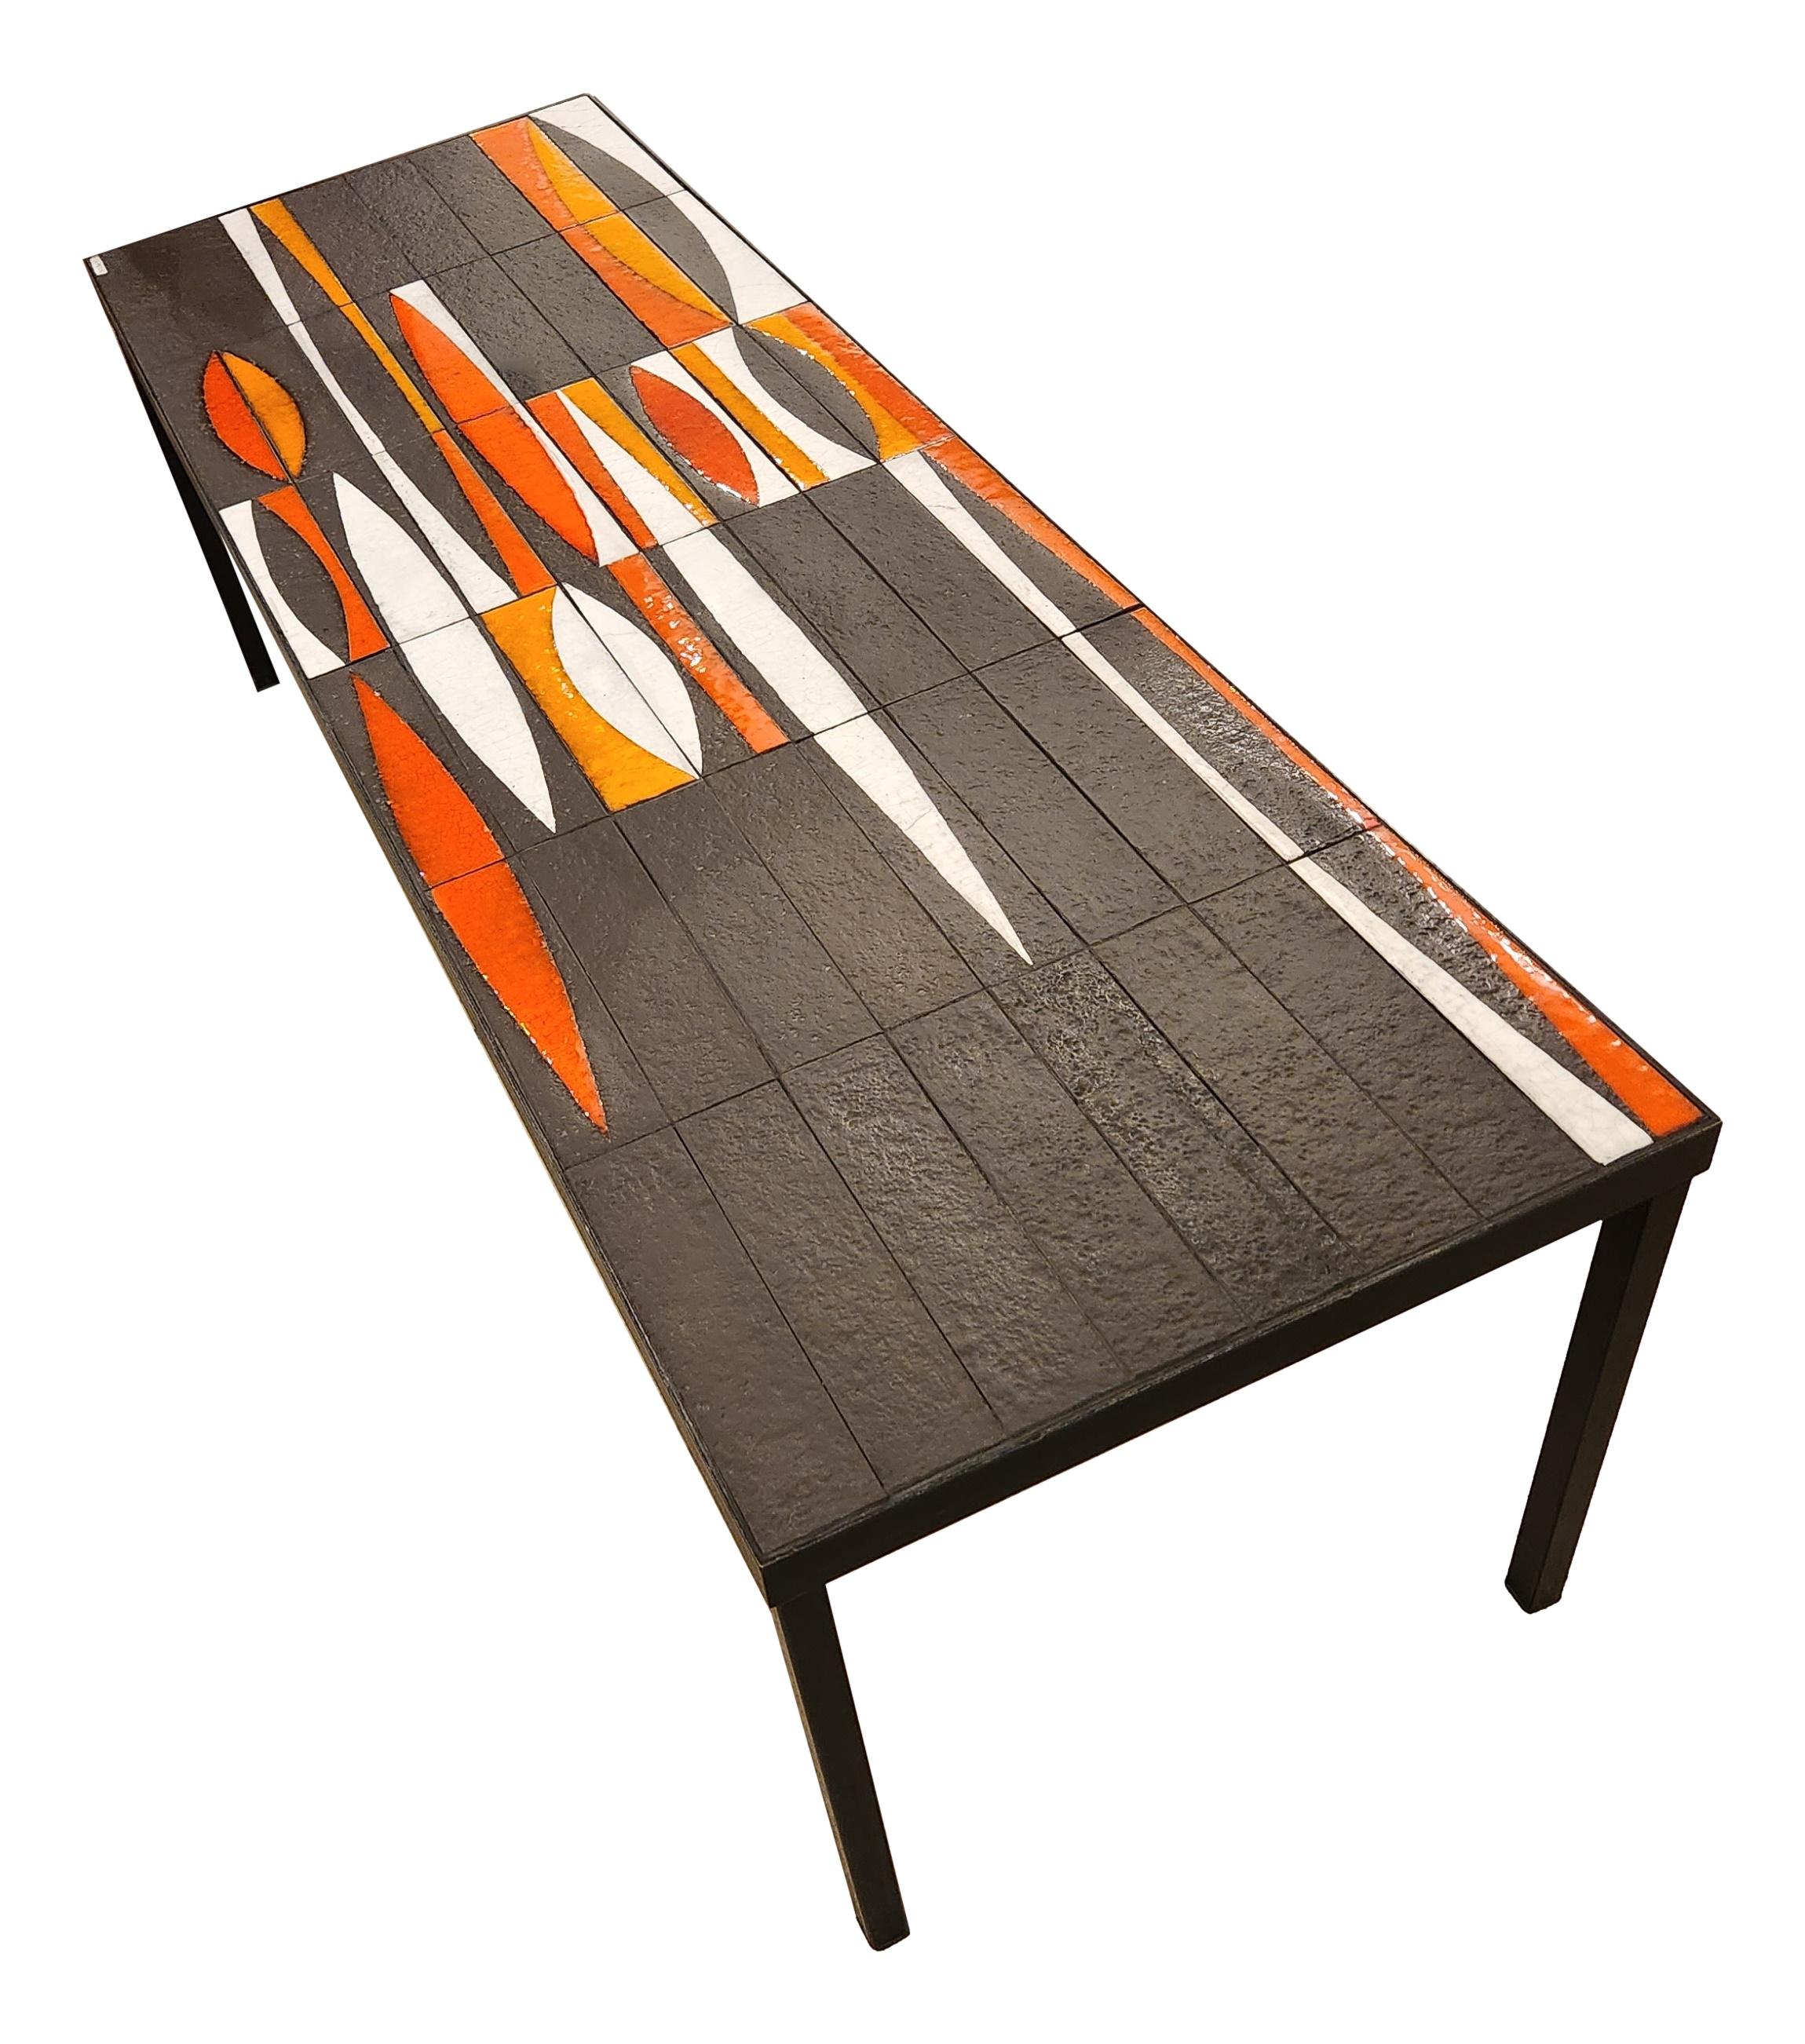 Mid-Century Modern Roger Capron - Vintage Ceramic Coffee Table with Navette Tiles, 1950's For Sale